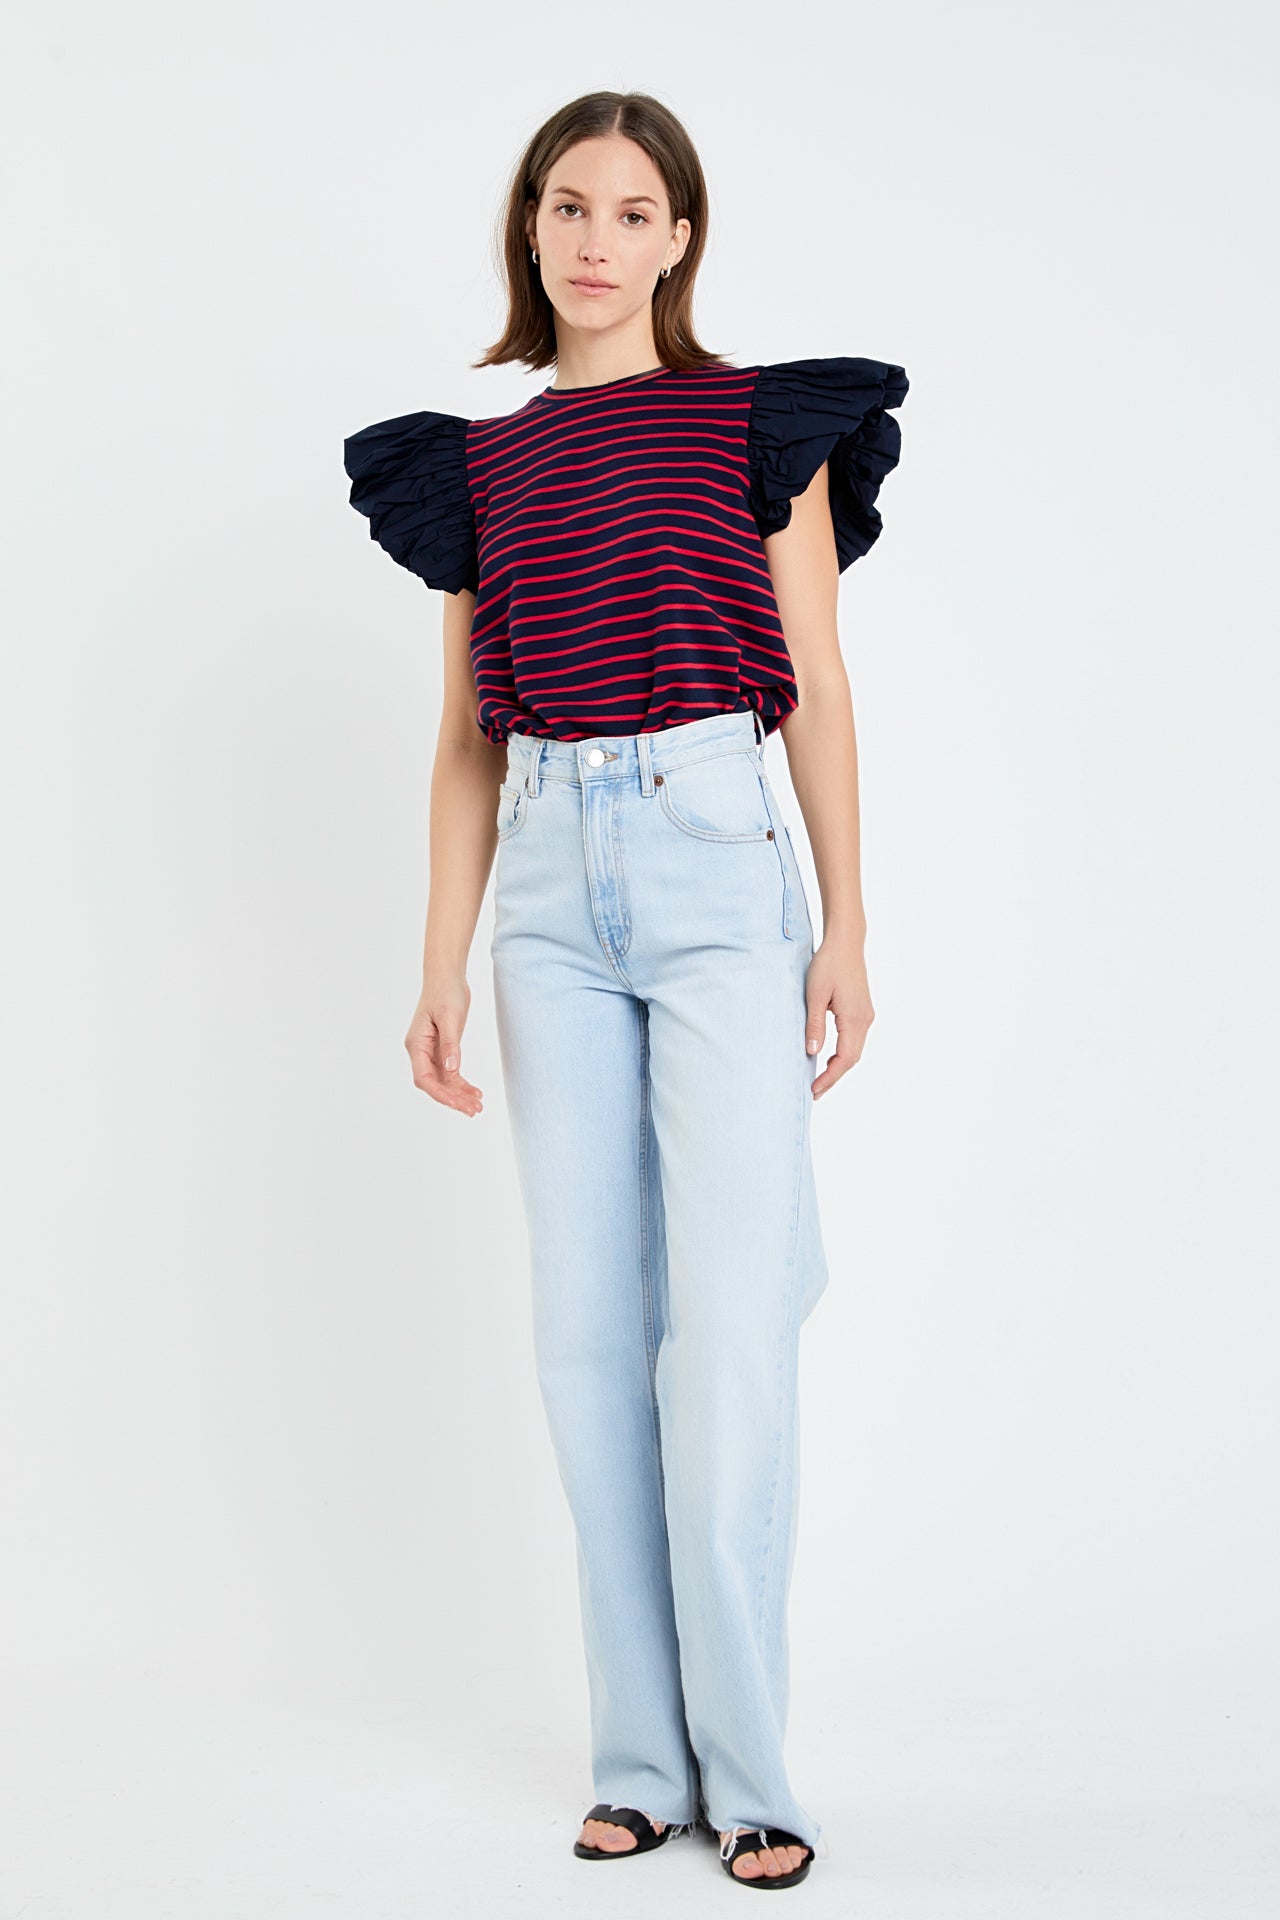 ENGLISH FACTORY - Stripe Knit with Poplin Puff Sleeve Top - TOPS available at Objectrare